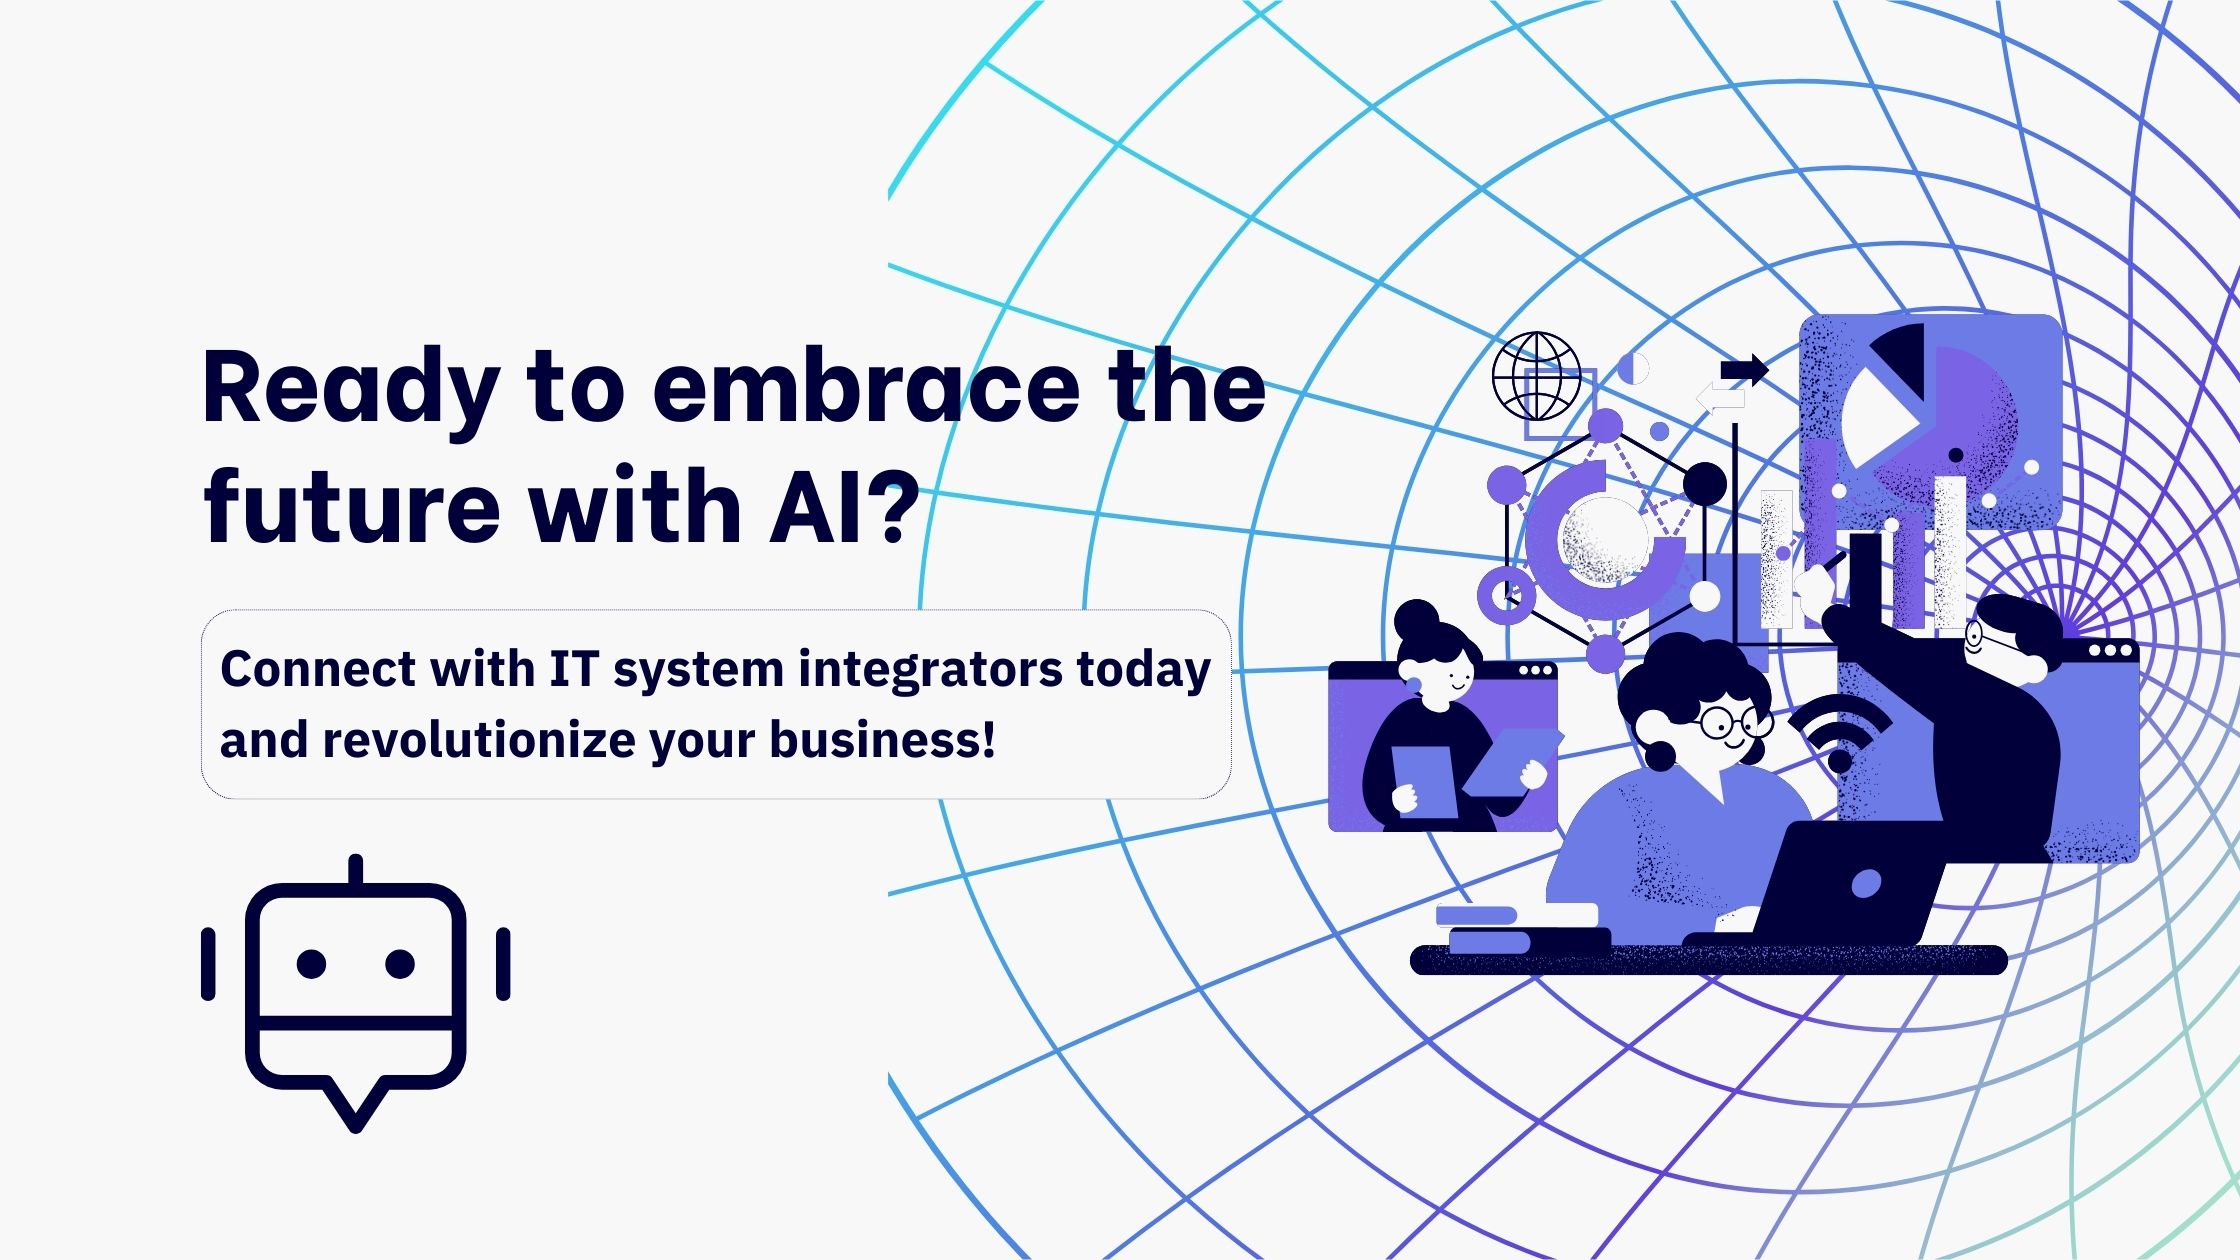 Ready to embrace the future with AI with IT System Integrators